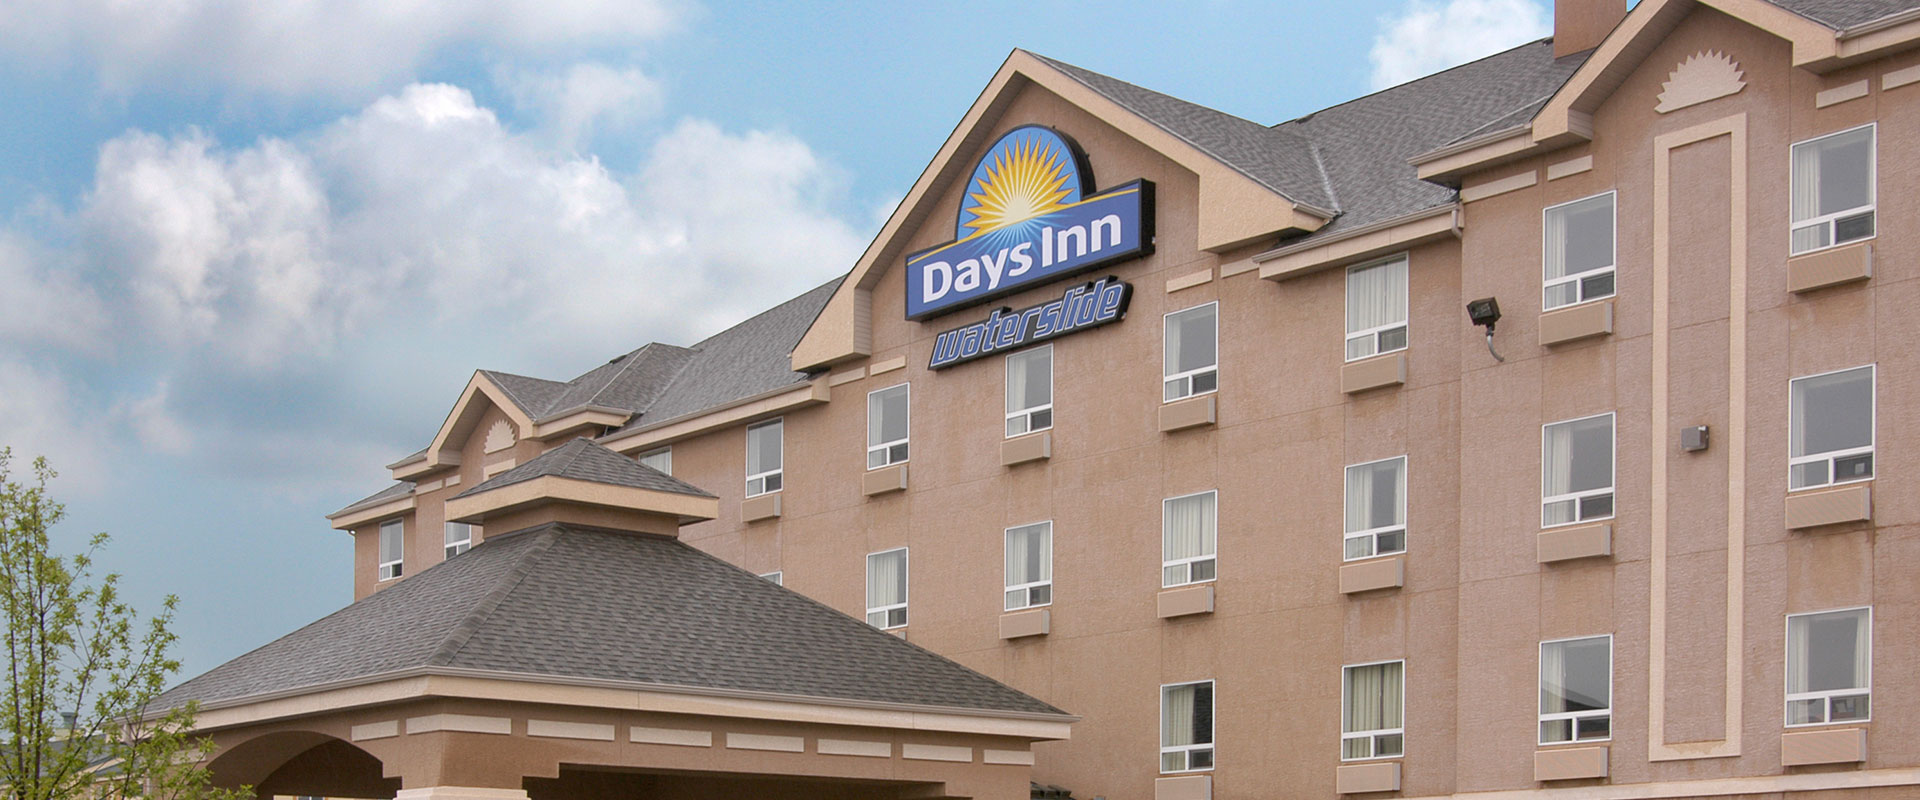 Large sized view of the exterior building of Days Inn Red Deer, Alberta with the company logo signage and a smaller sign that reads waterslide.
